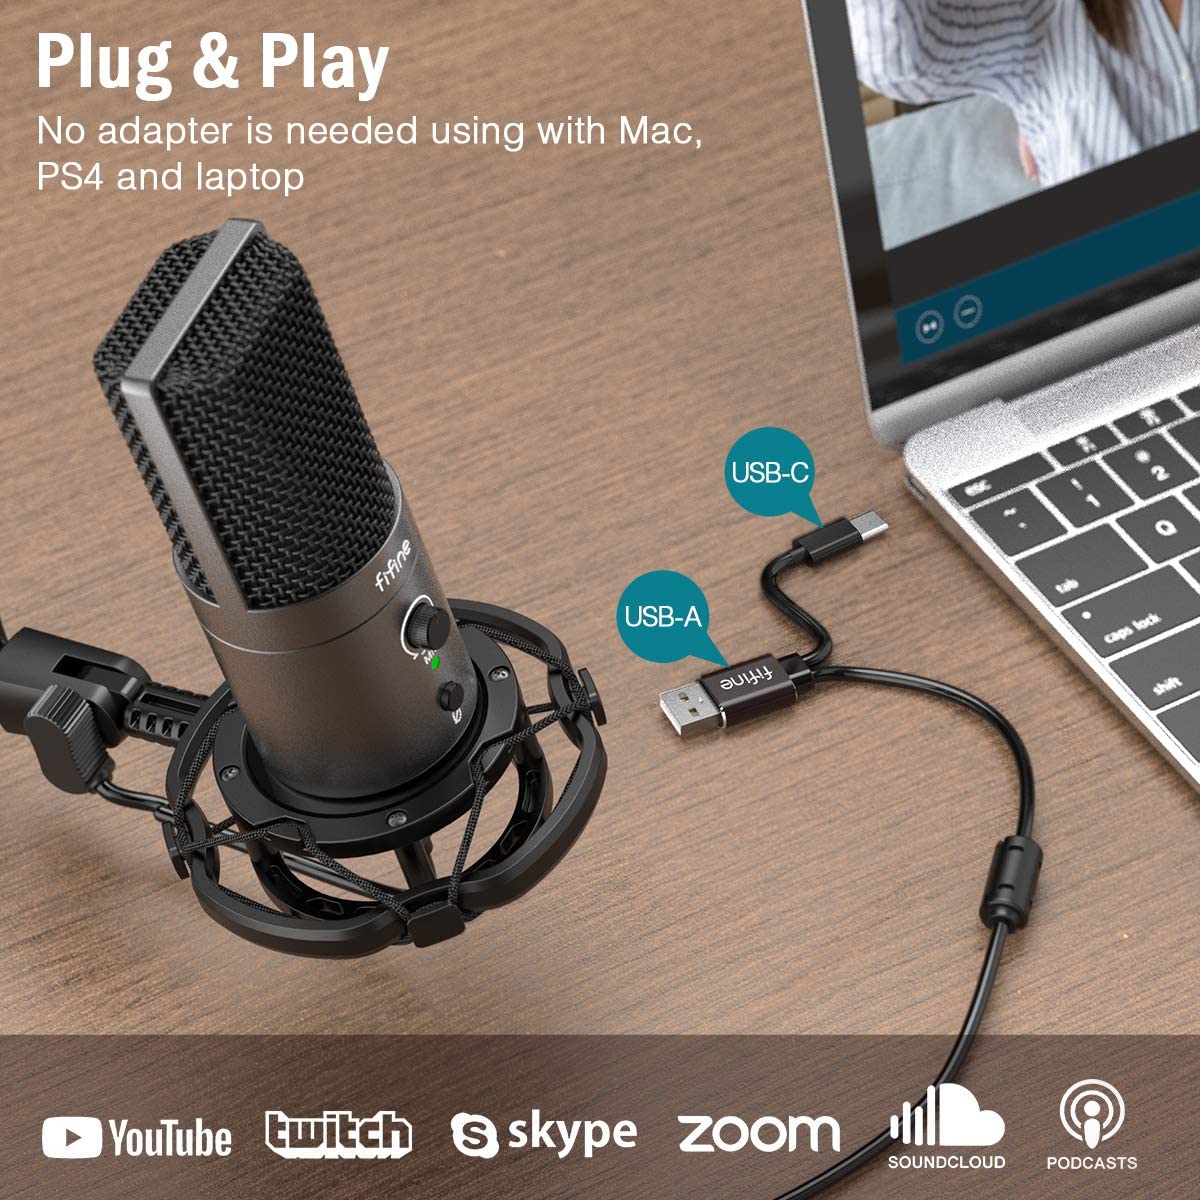 FIFINE T683 USB MICROPHONE BUNDLE WITH A MUTE BUTTON, A VOLUME DIAL & A MONITORING JACK FOR PC/MAC/MOBILE